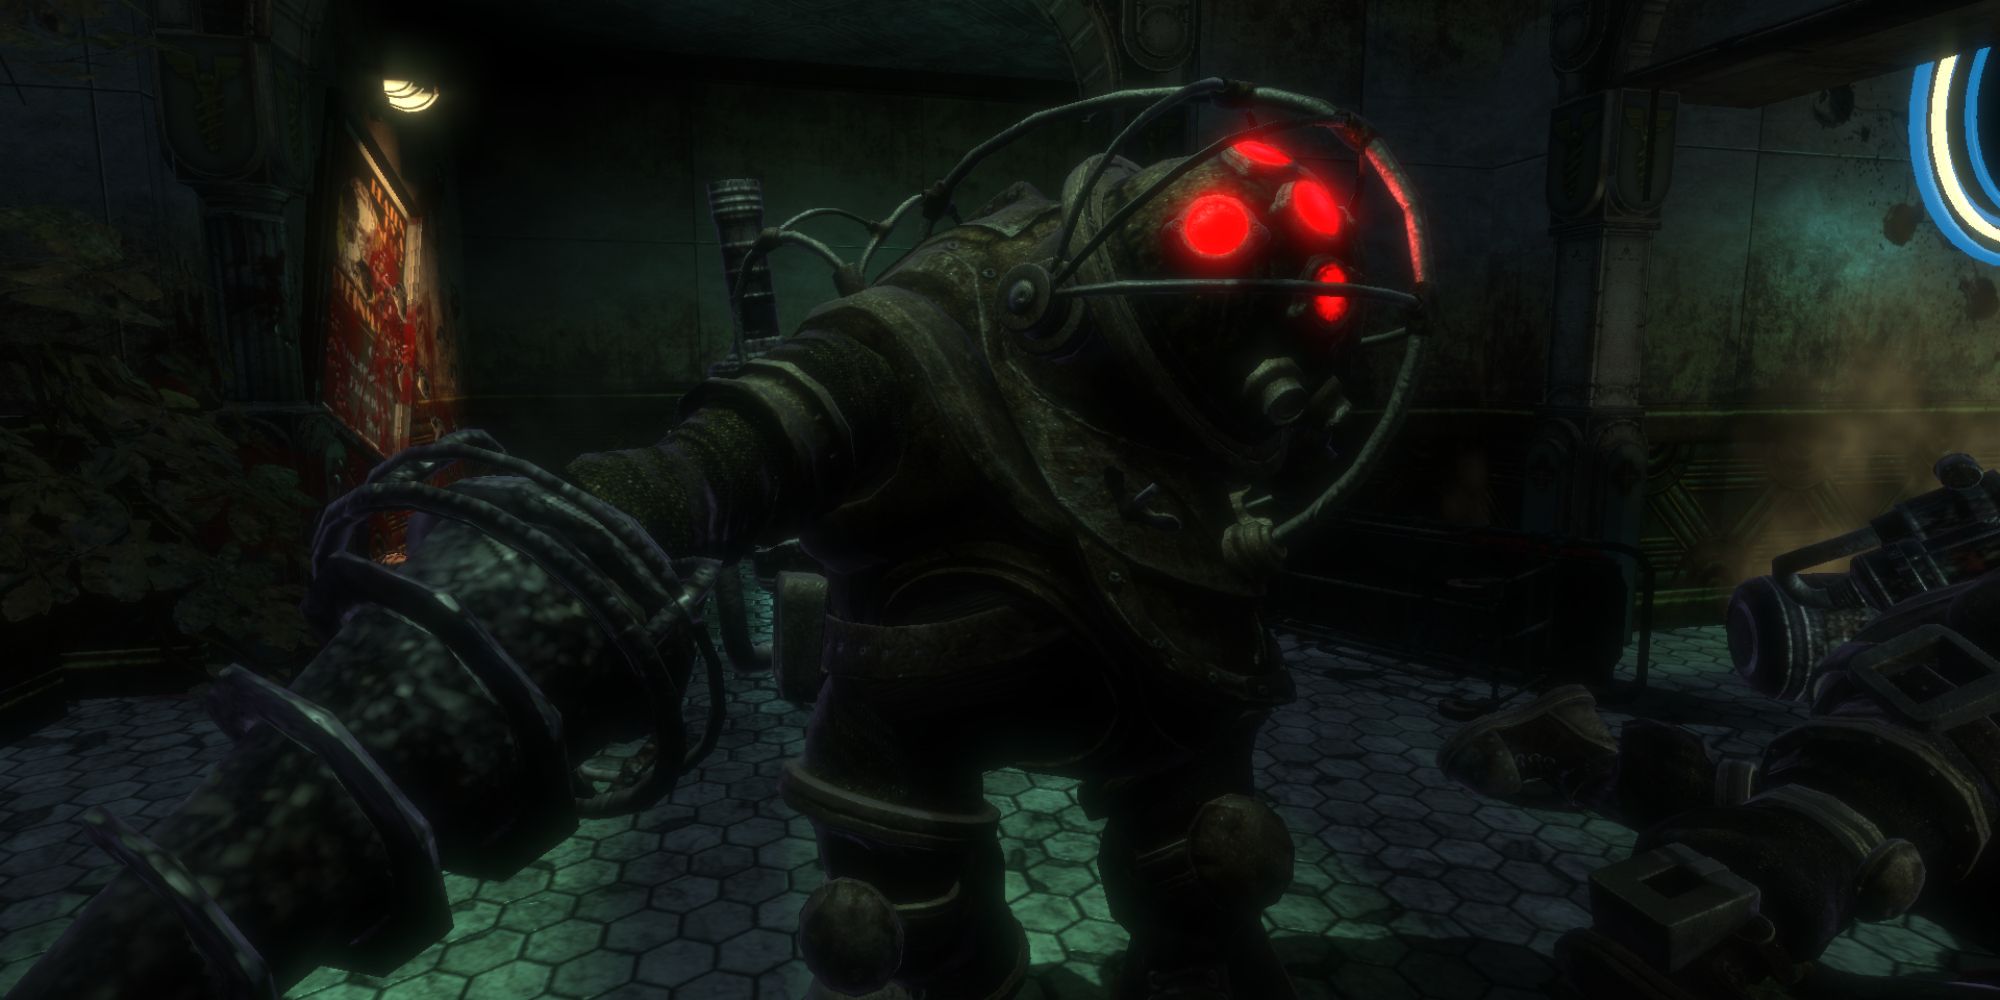 Big Daddy attacking the player in Bioshock